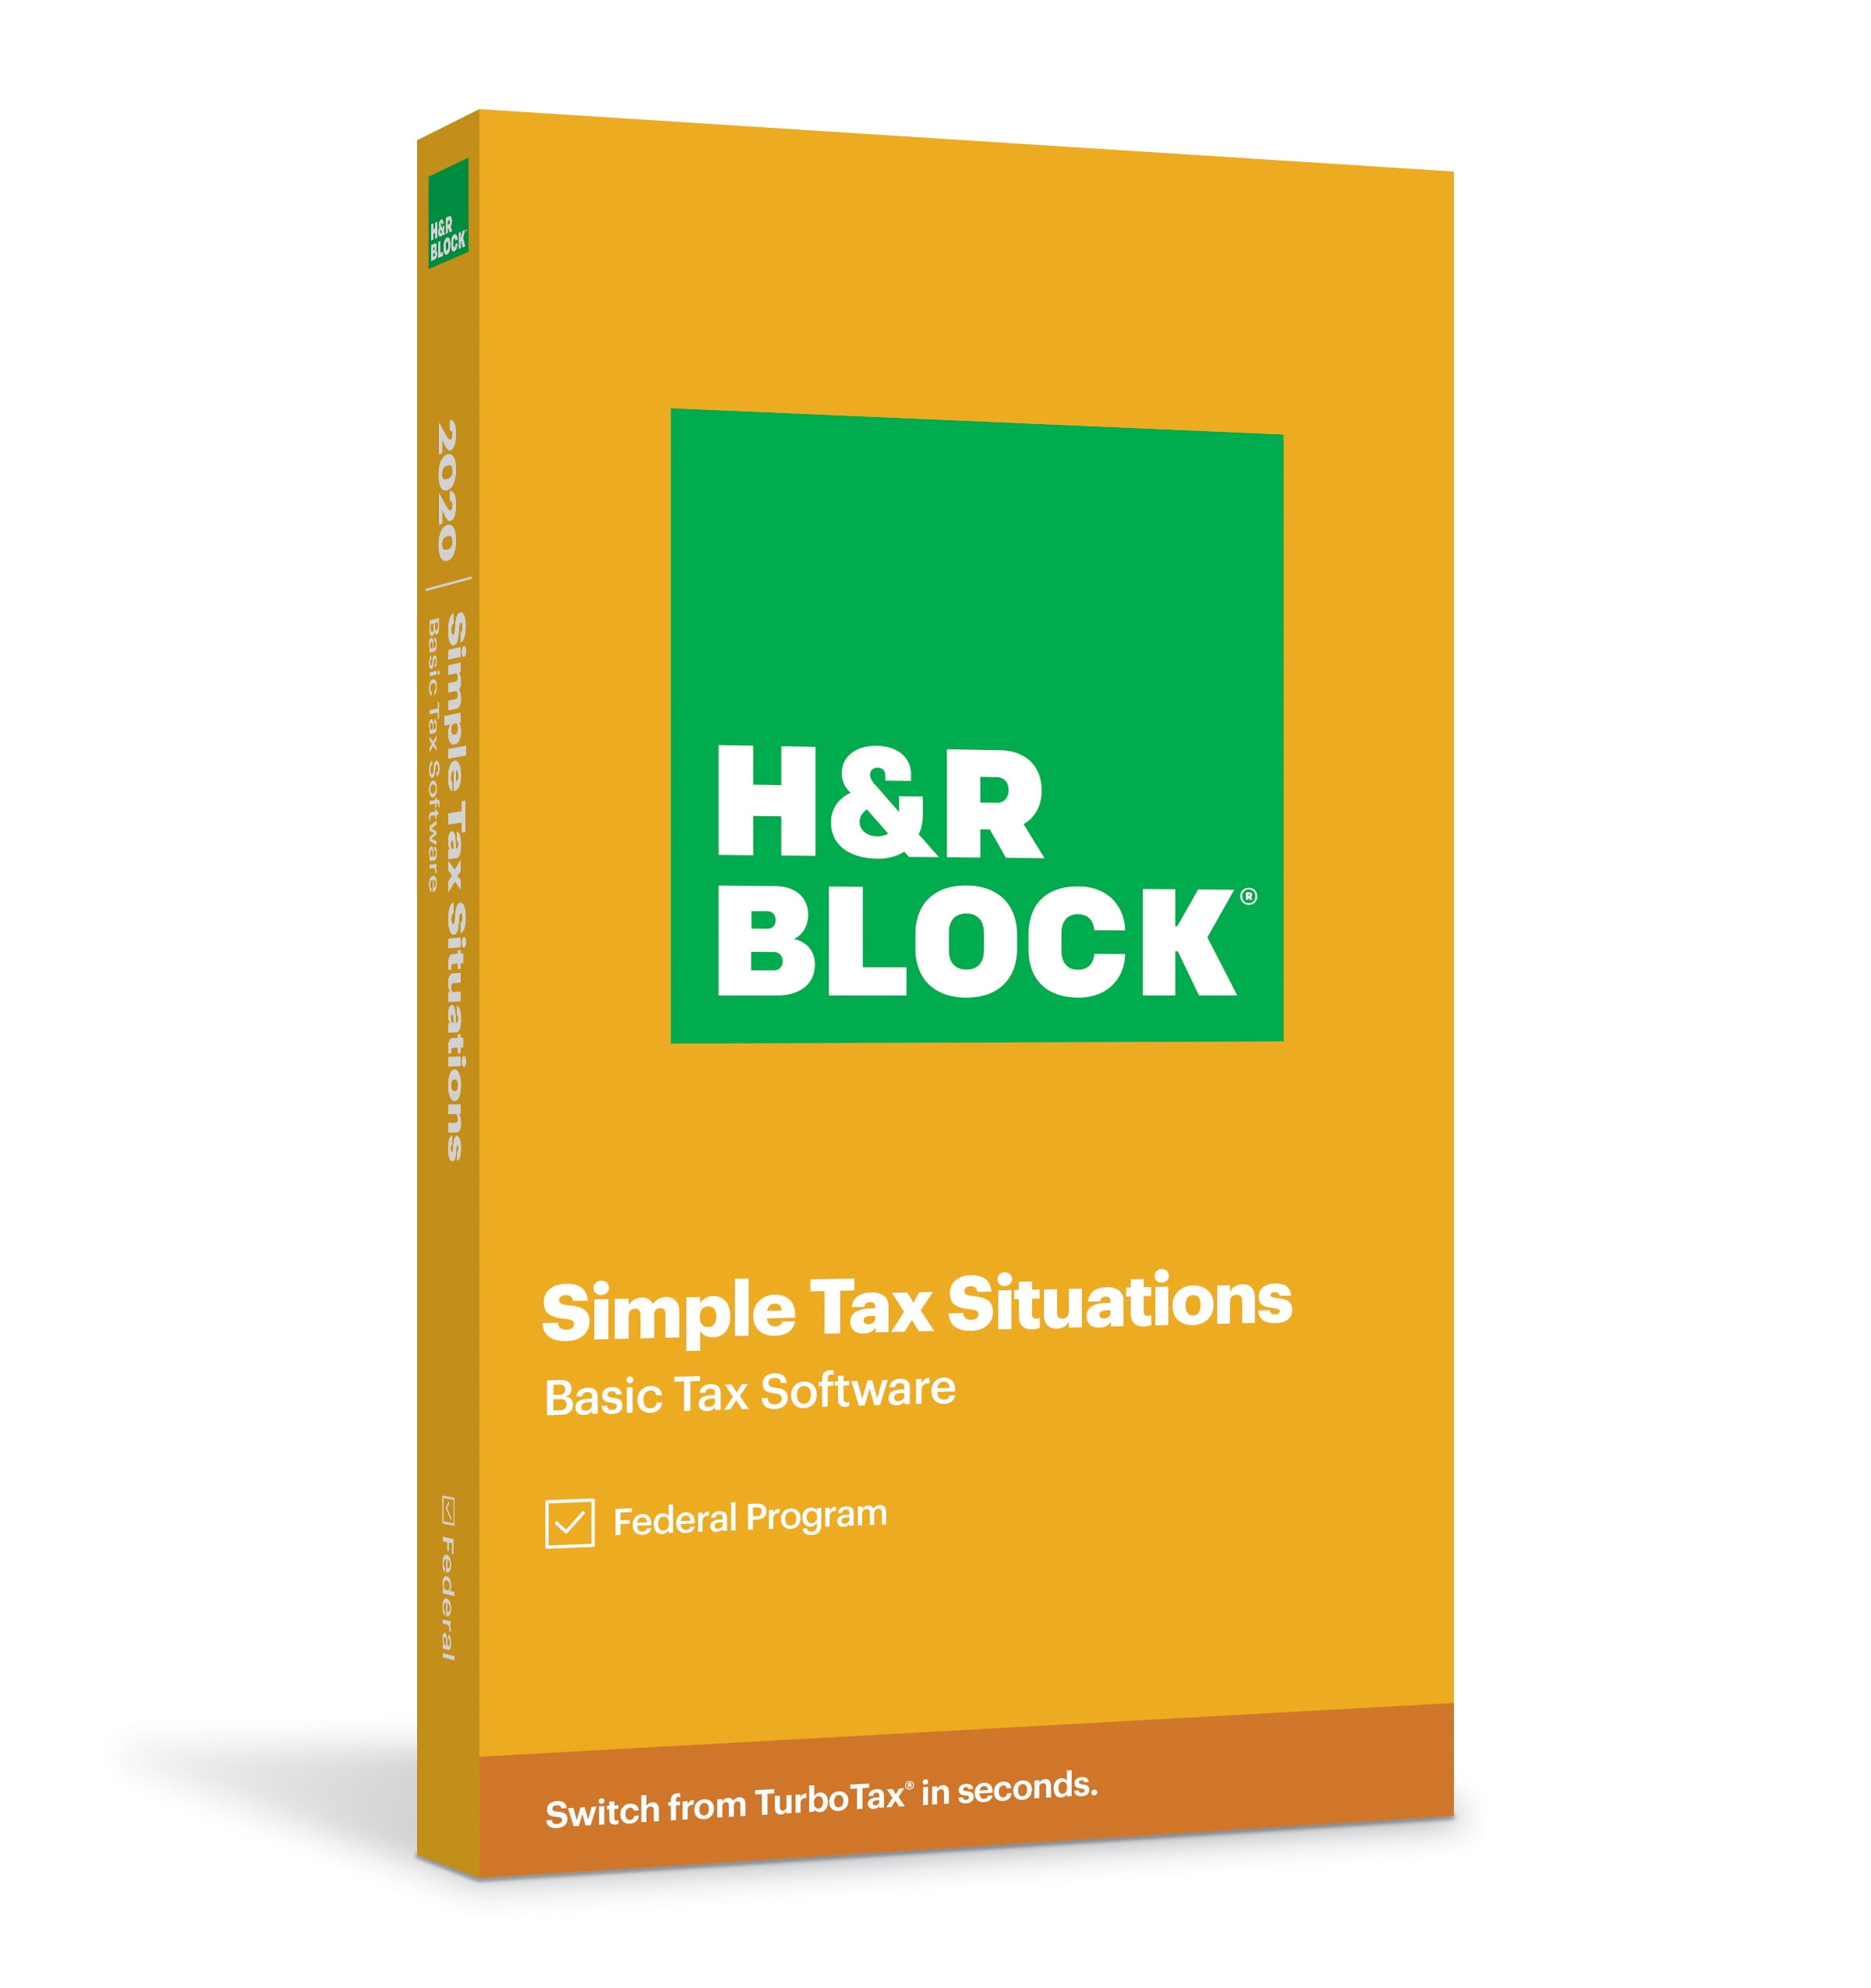 how to download h&r block tax software